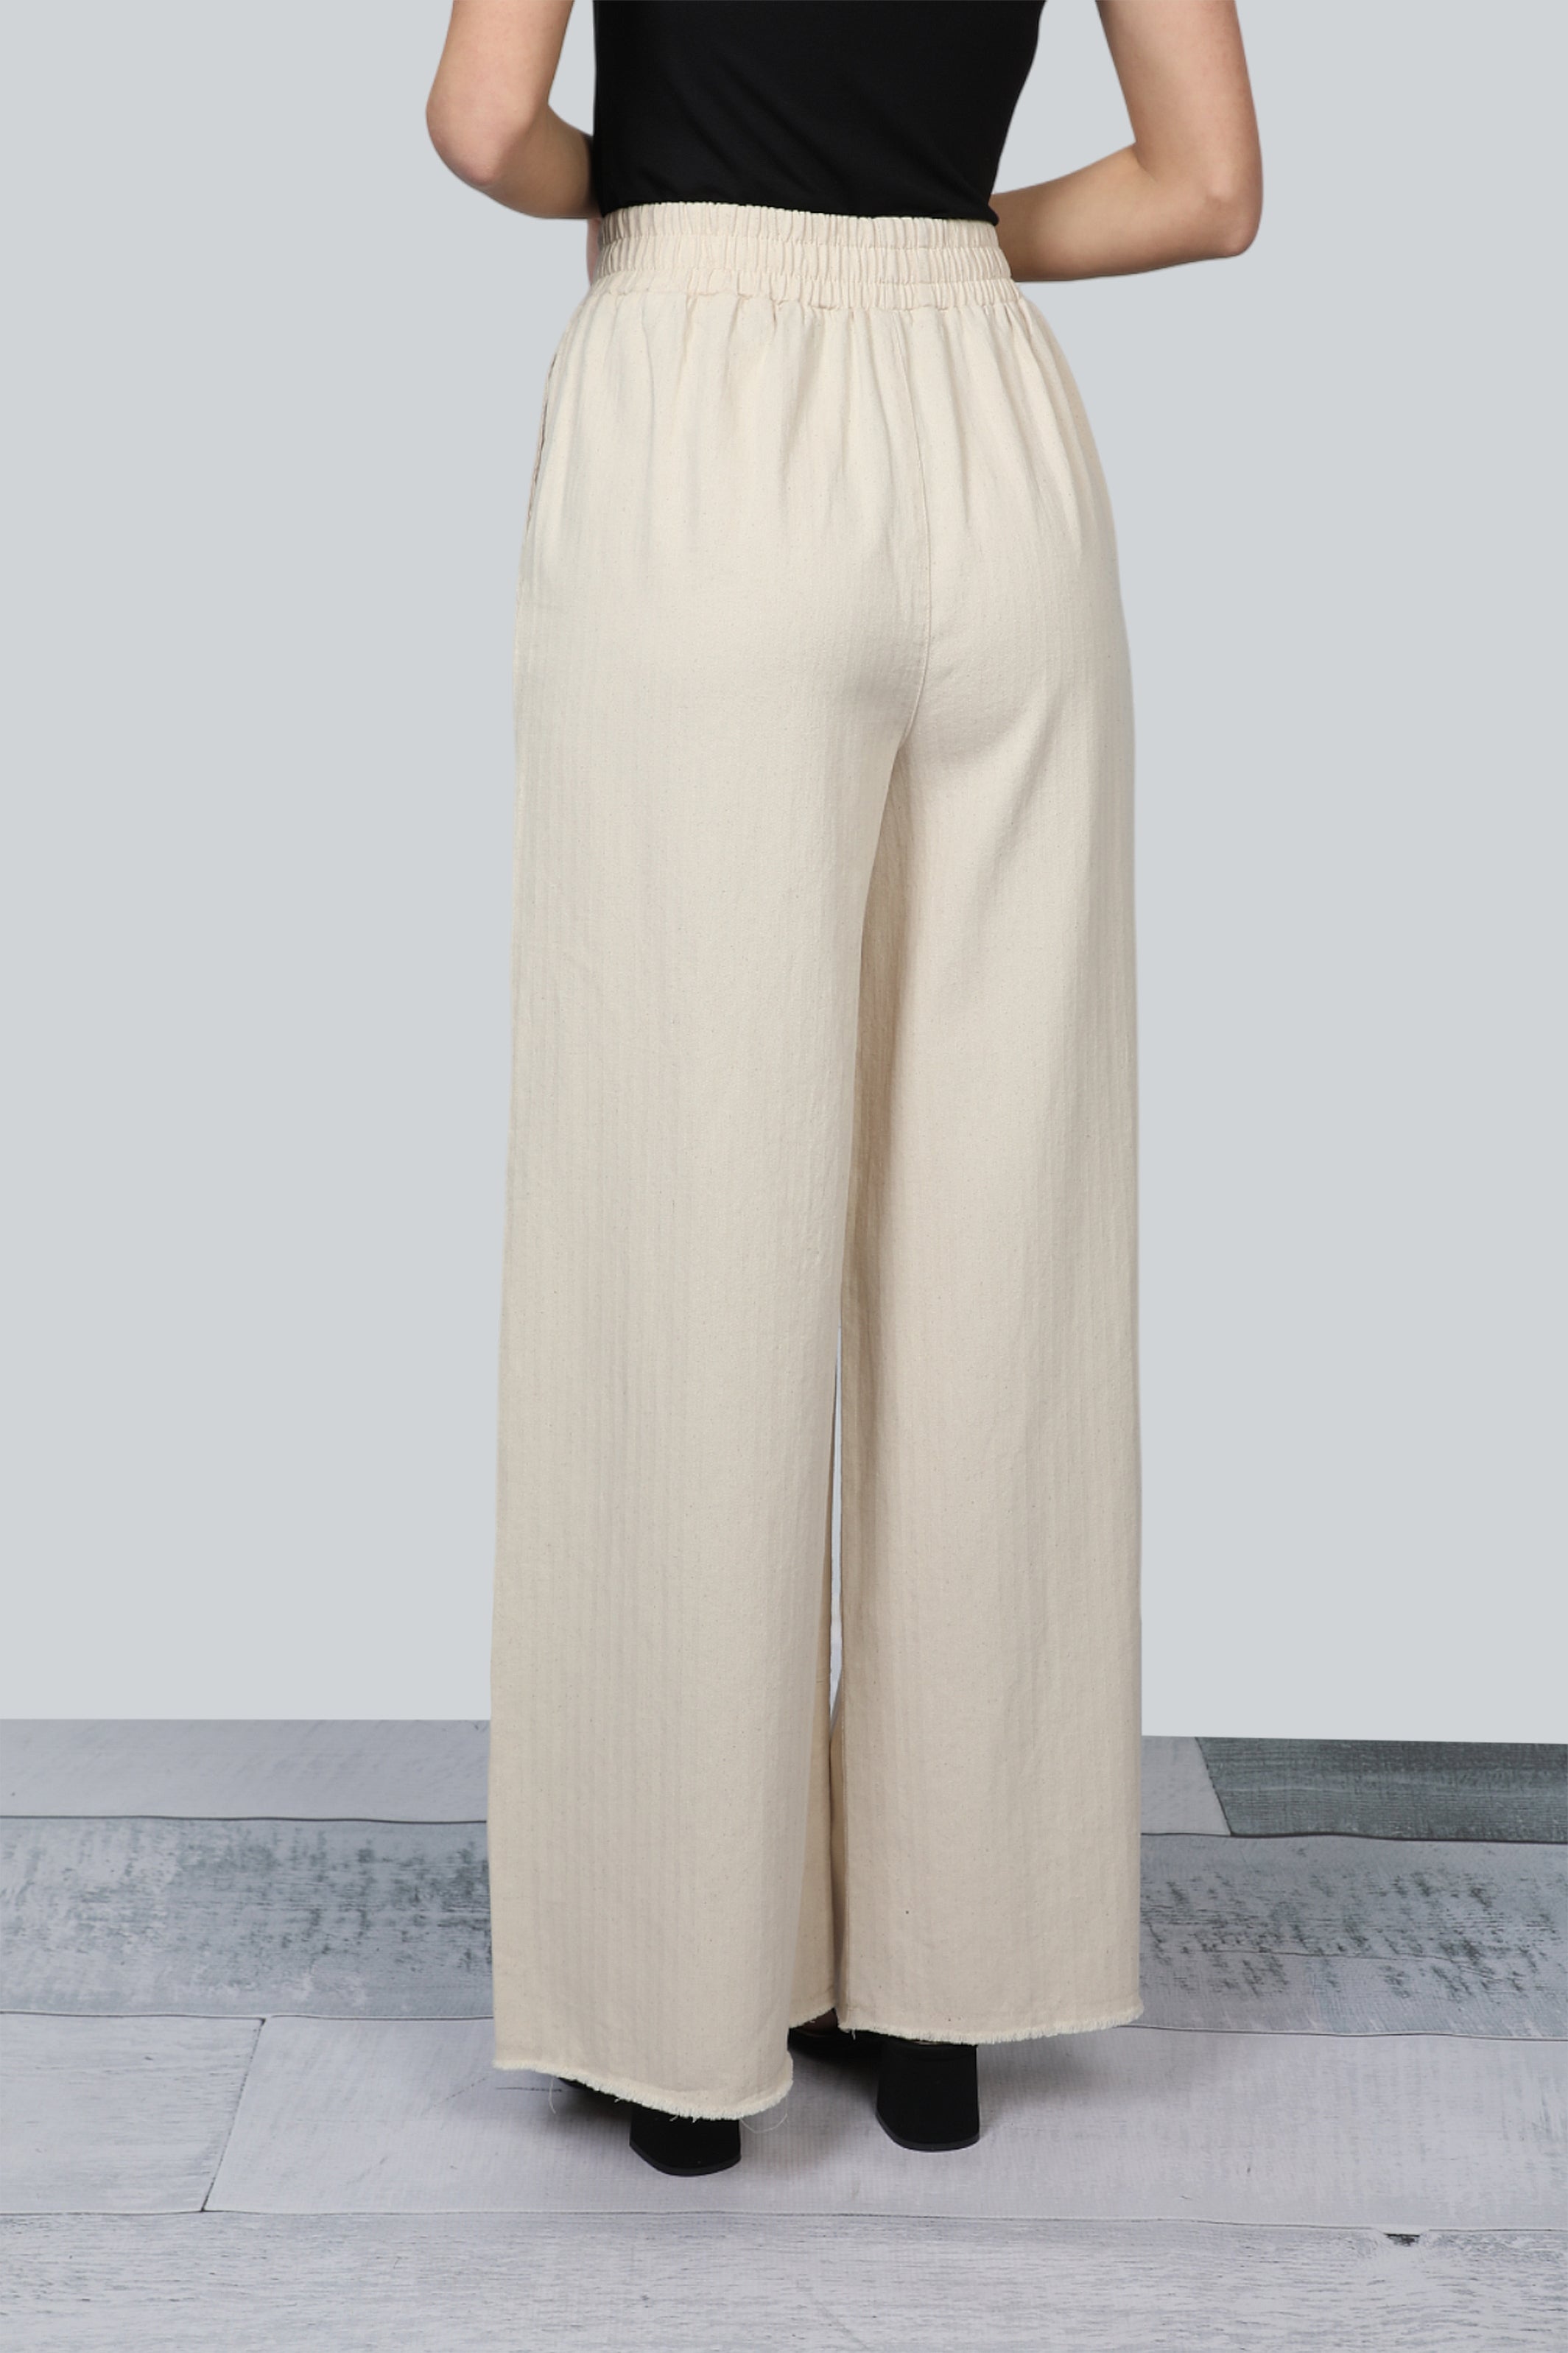 Beige Regular Pants With Printed Text Design